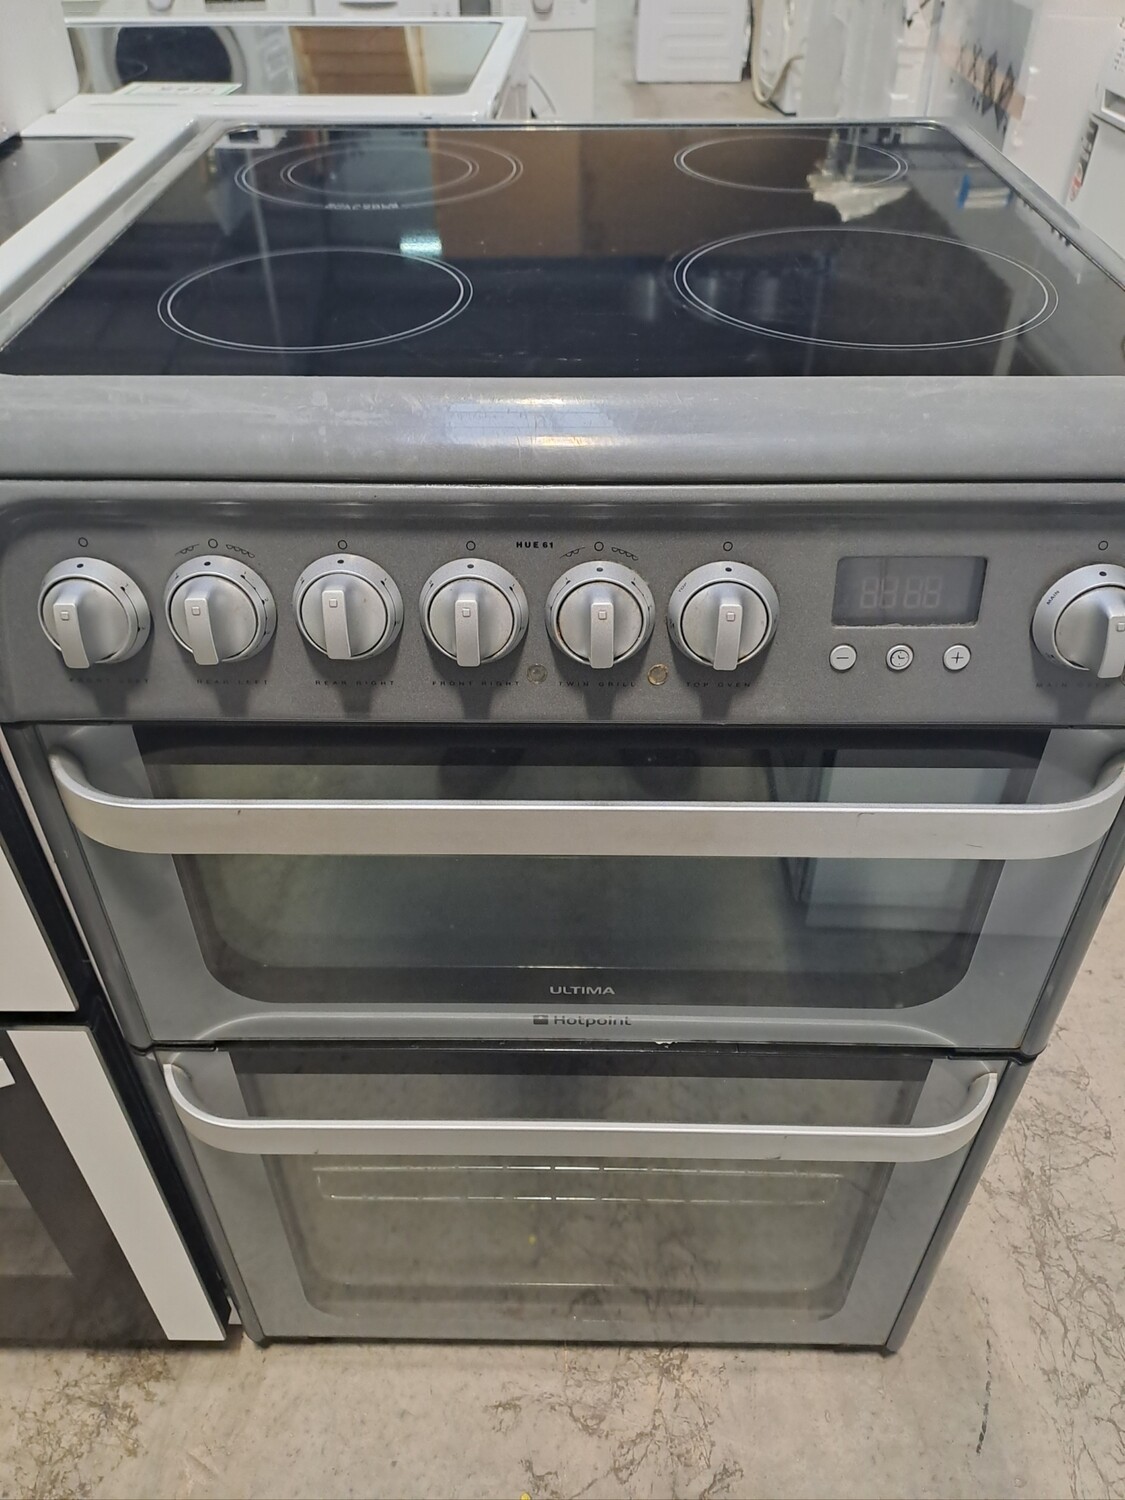 Hotpoint HUE61GS 60cm Electric cooker Twin Cavity Double Oven Ceramic Hob - Grey - Refurbished + 6 month guarantee. This item is located in our Whitby Road Shop 